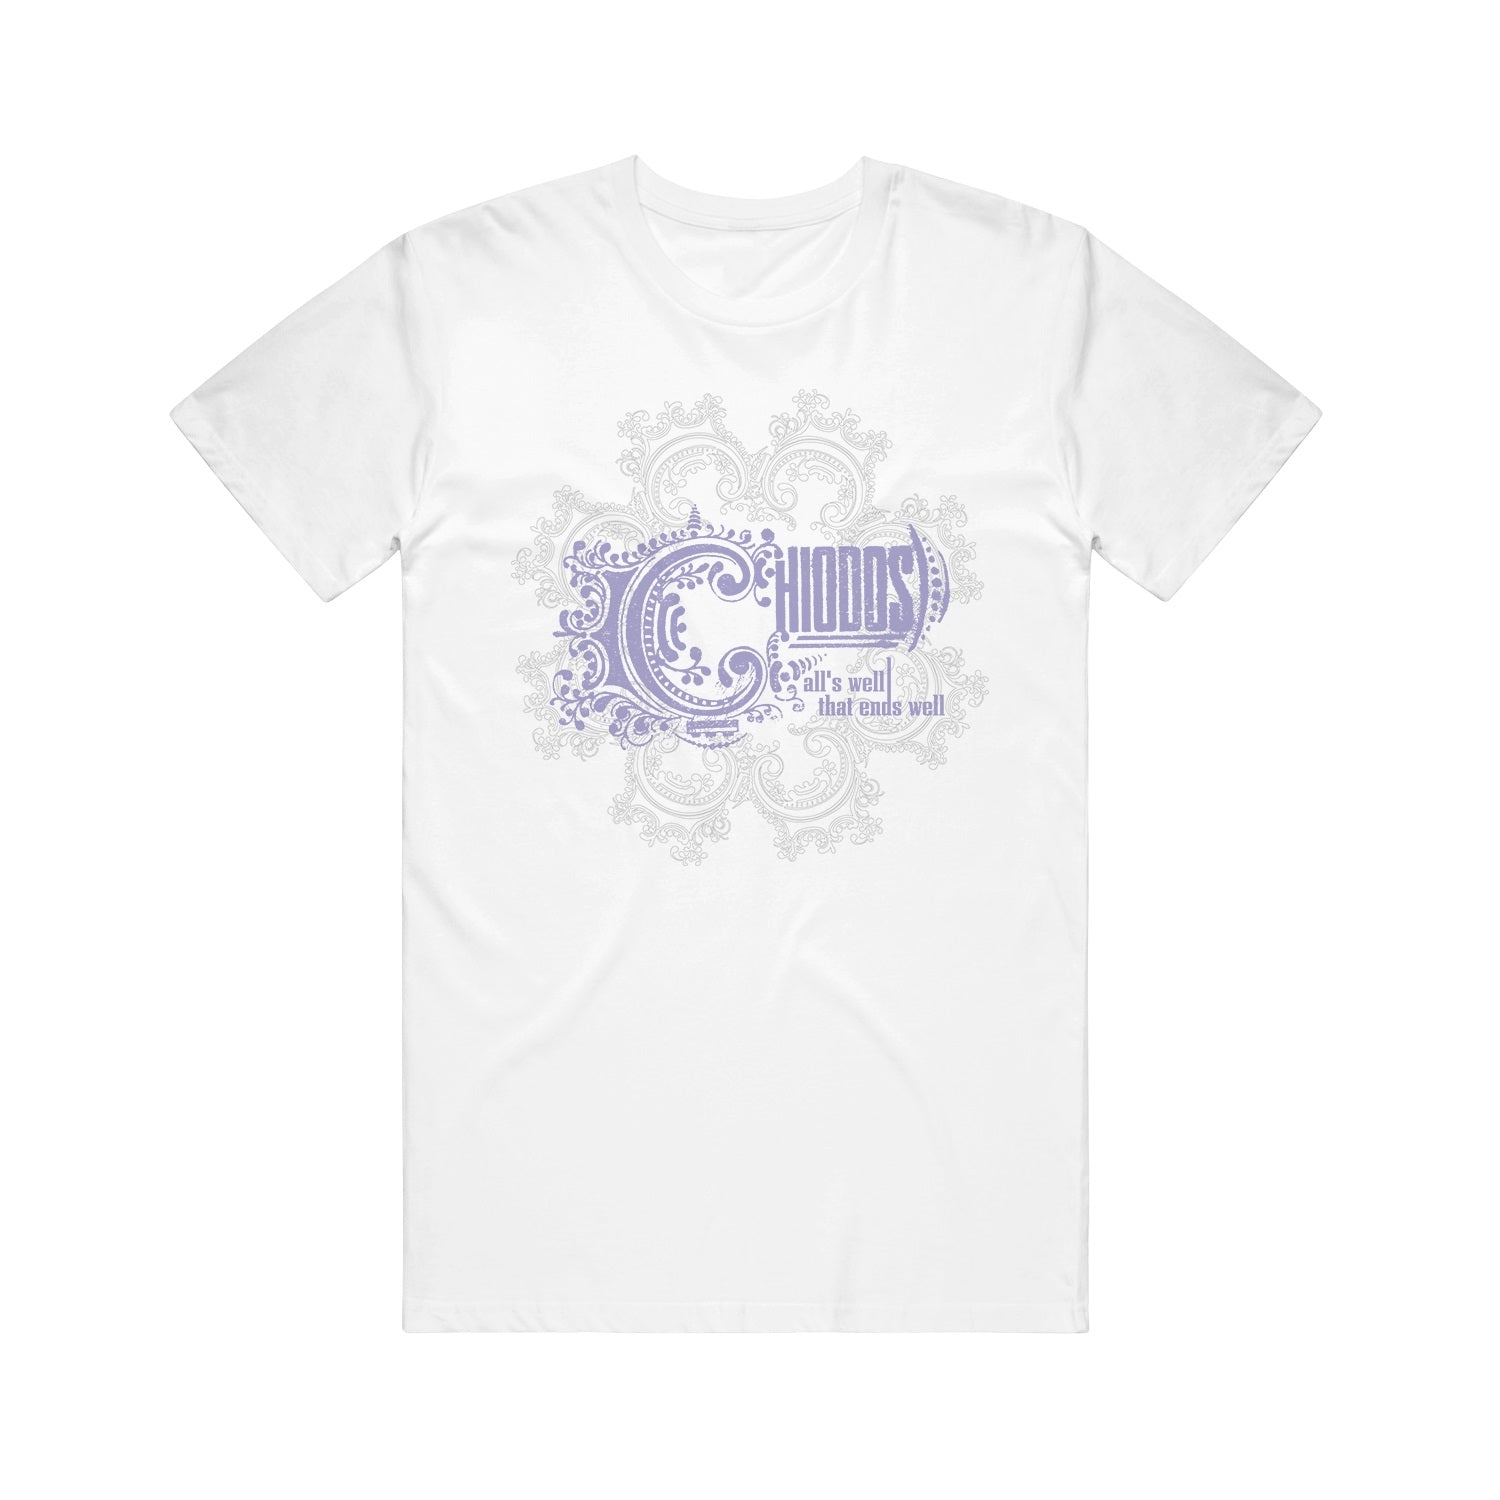 image of a white tee shirt on a white background. tee has center print in grey and purple that says Chiodos All's Well That Ends Well  